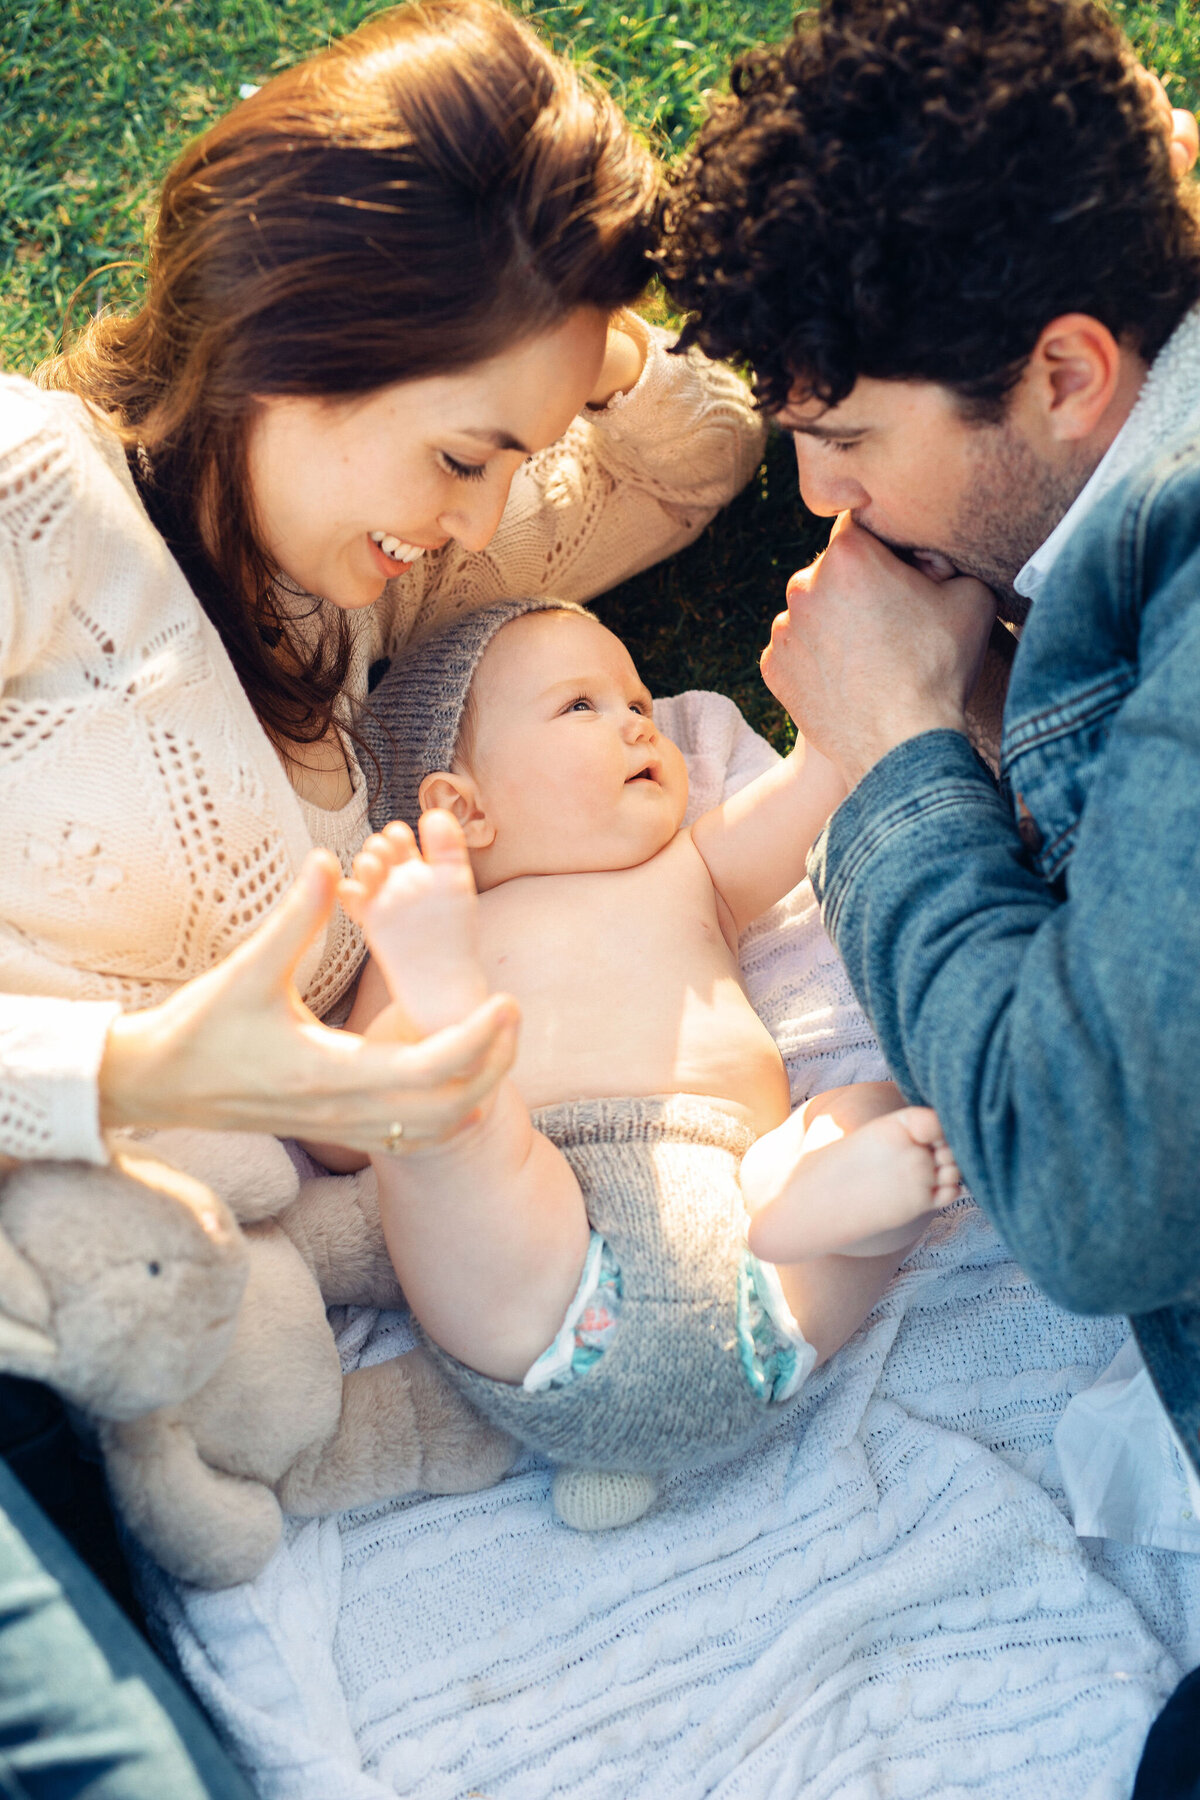 Family Portrait Photo Of Couple Looking At Their Baby In Los Angeles